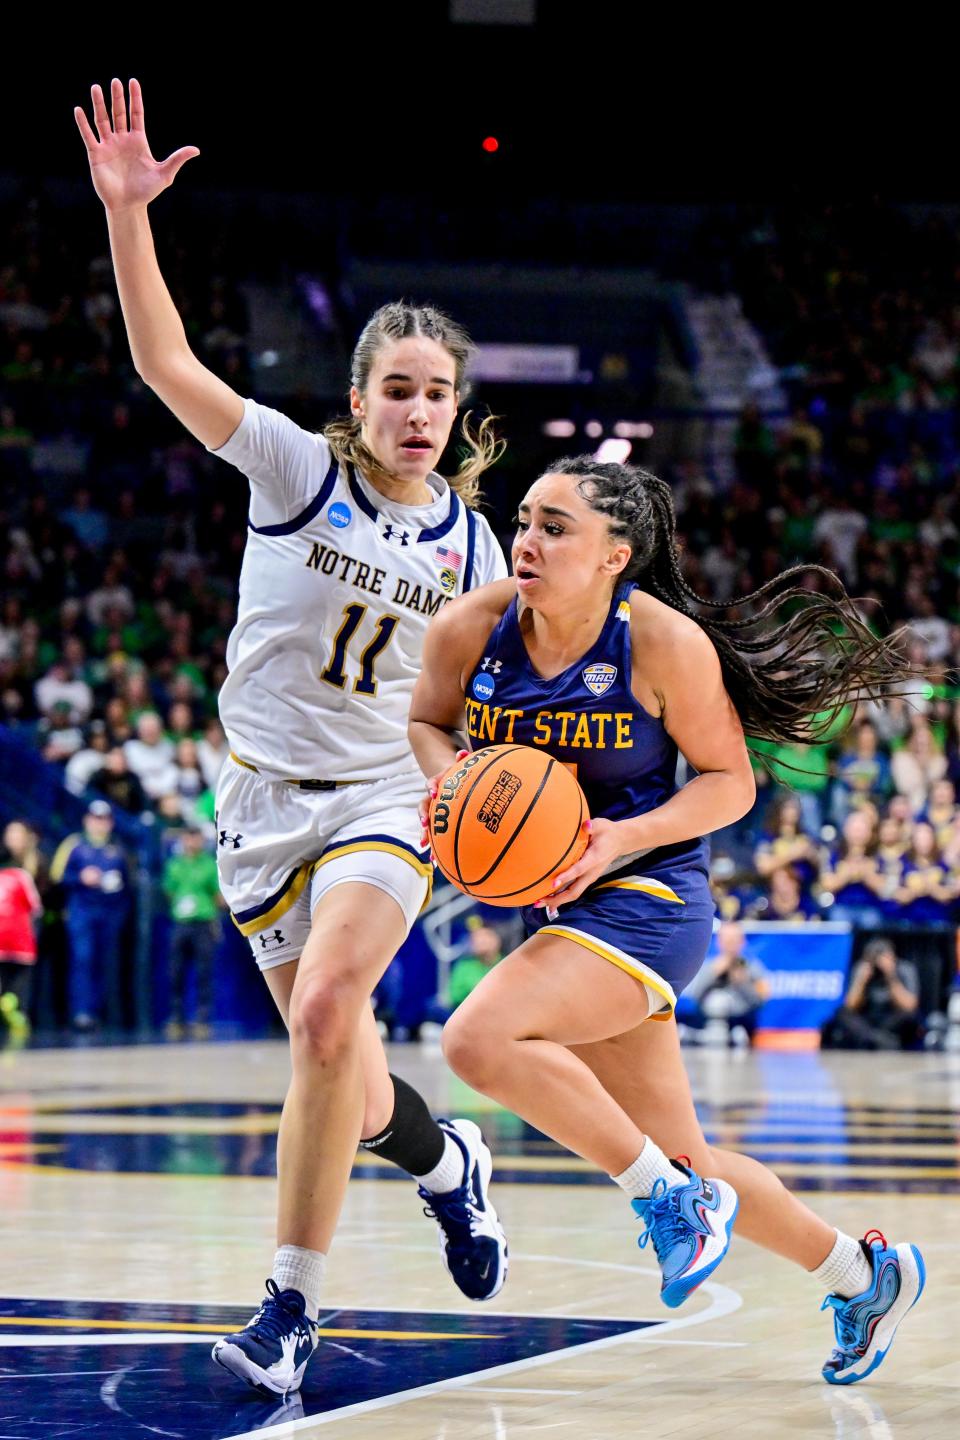 Kent State's Dionna Gray (21) drives to the basket as Notre Dame's Sonia Citron (11) defends in the first half of an NCAA Tournament first-round game Saturday in South Bend, Ind.